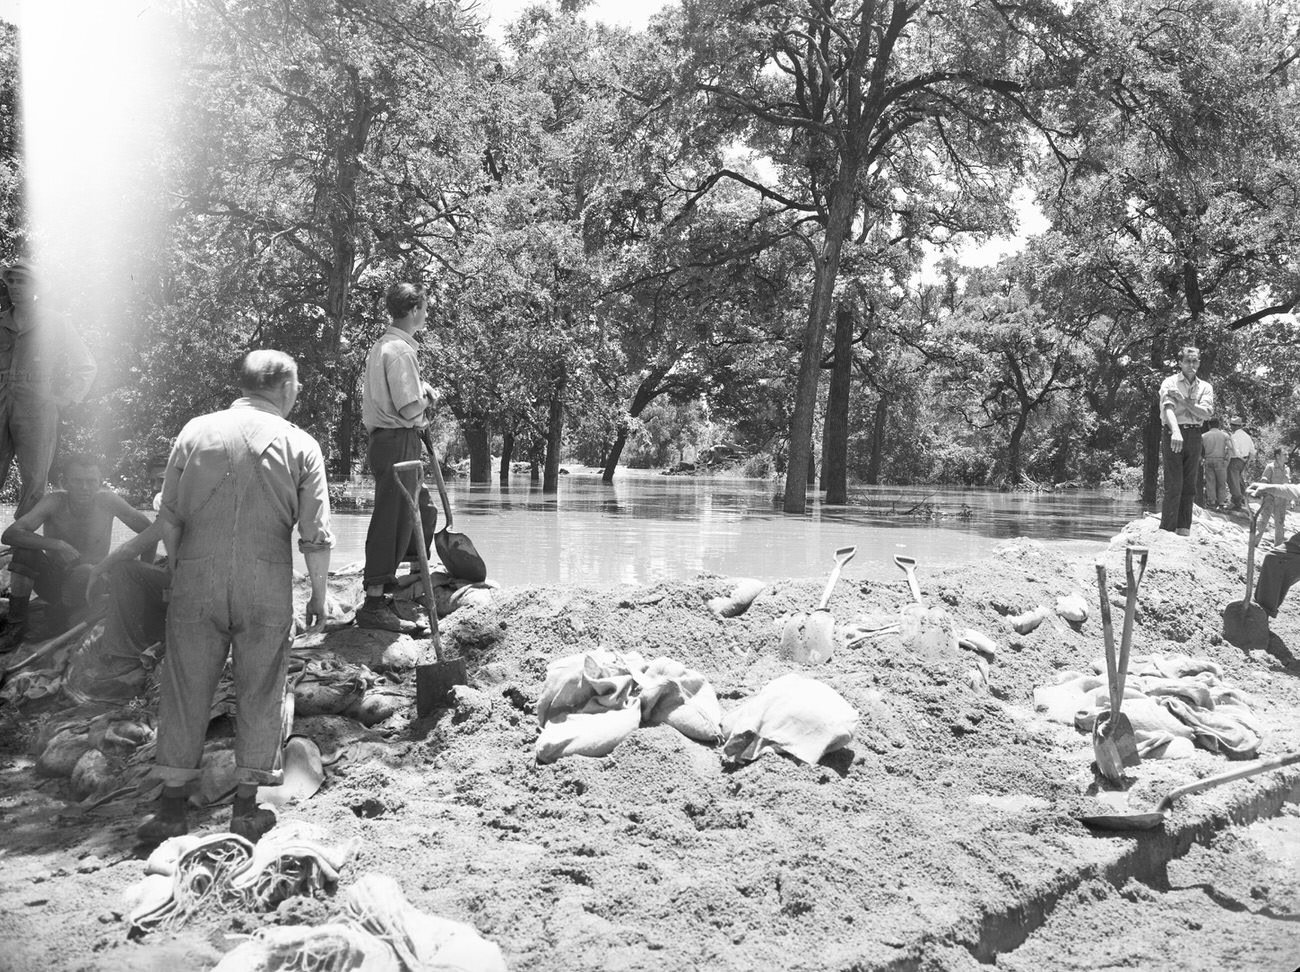 Flood damage looking southeast from the levee to the park, 1949